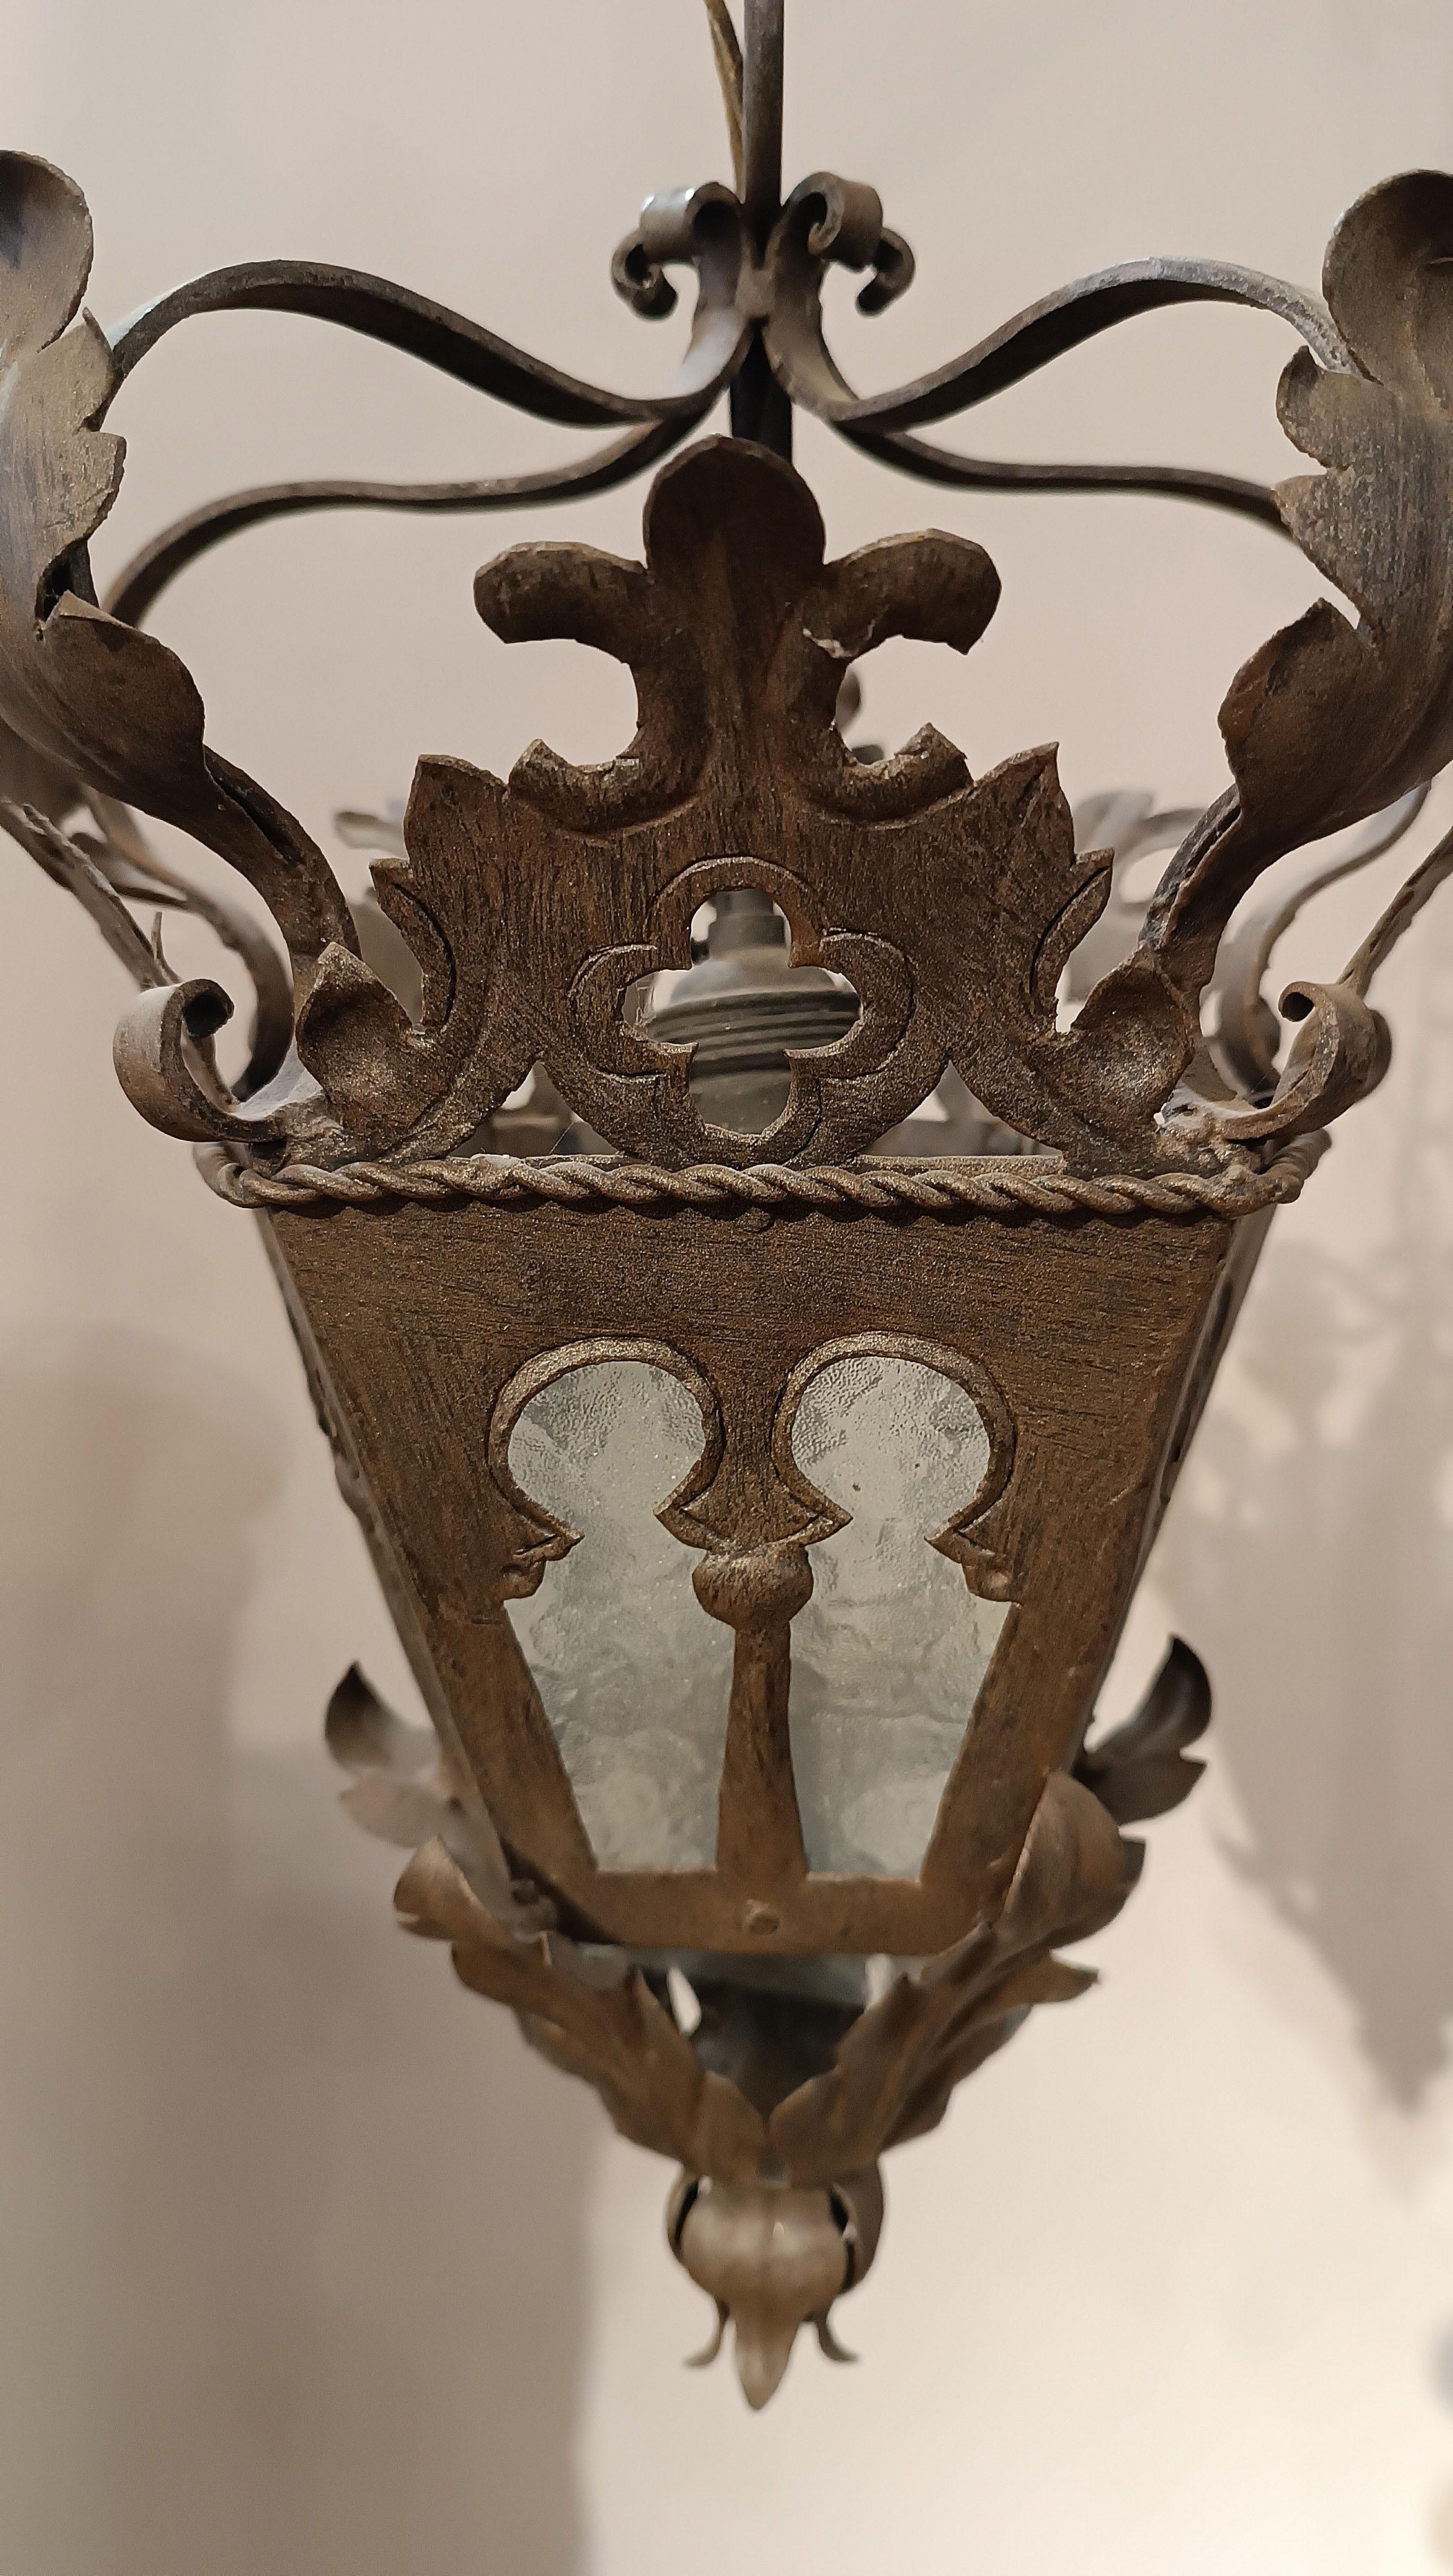 END OF THE 19th CENTURY IRON LANTERN HOLDER For Sale 1